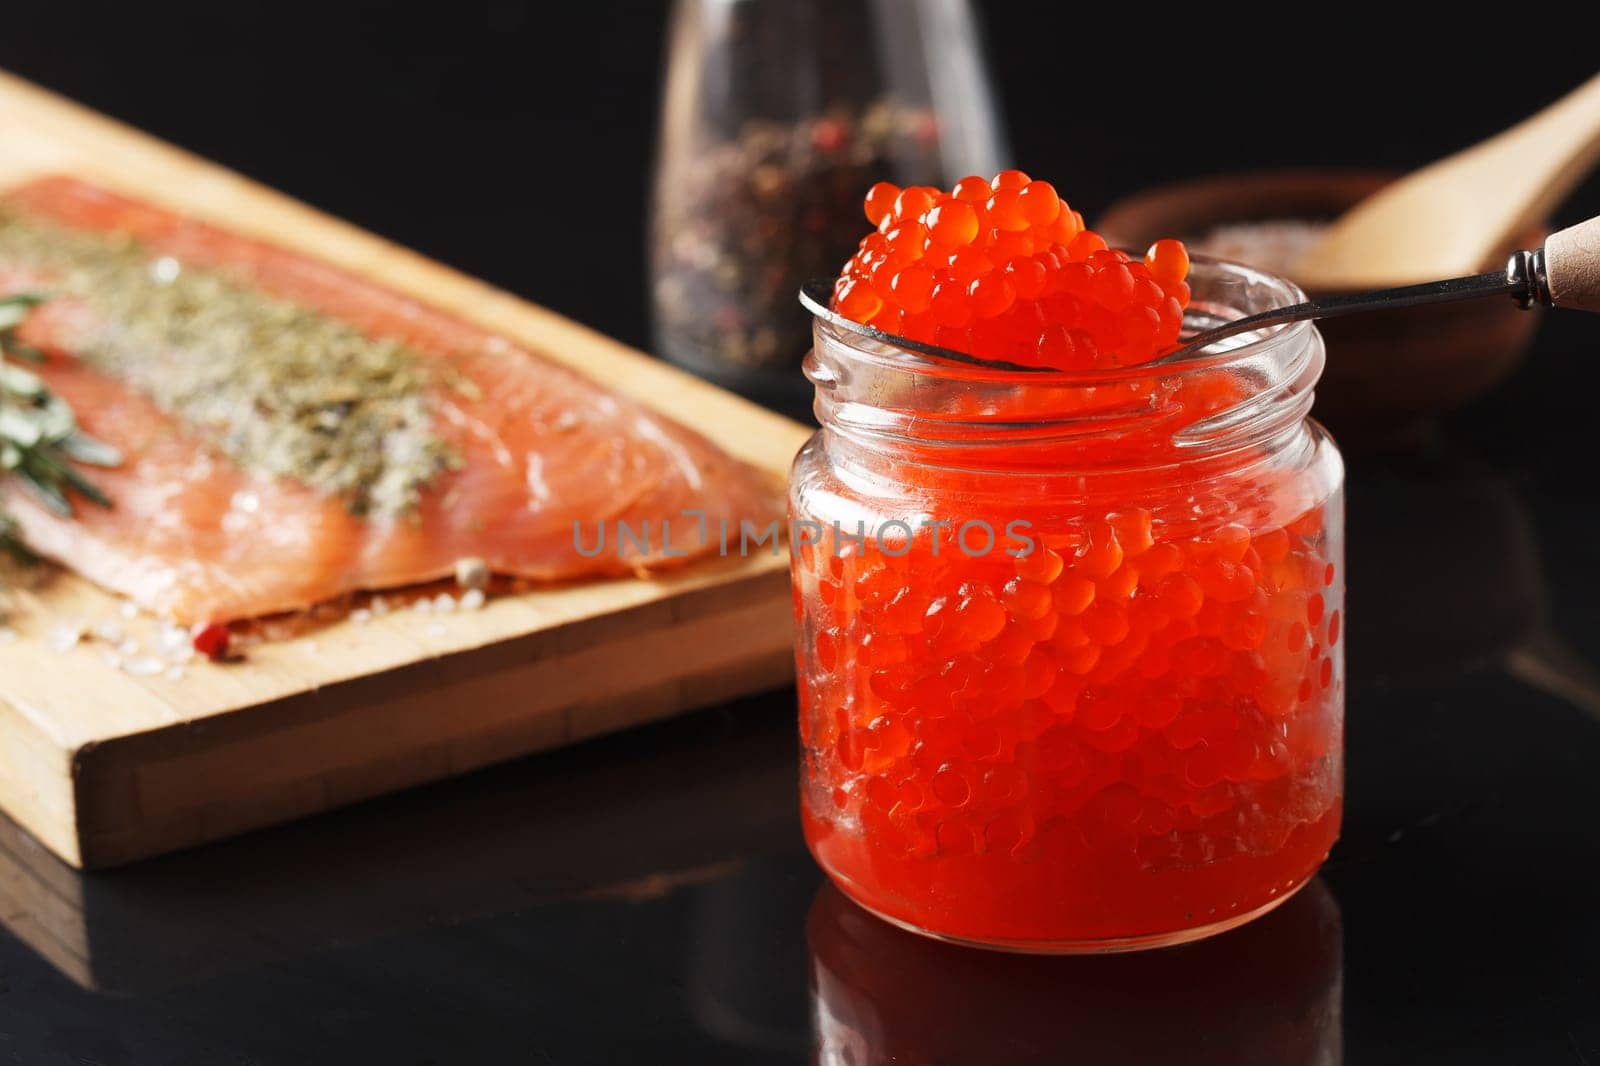 Salted fish fillet with spices, dill and rosemary on a wooden board and a jar of red caviar on a black background.